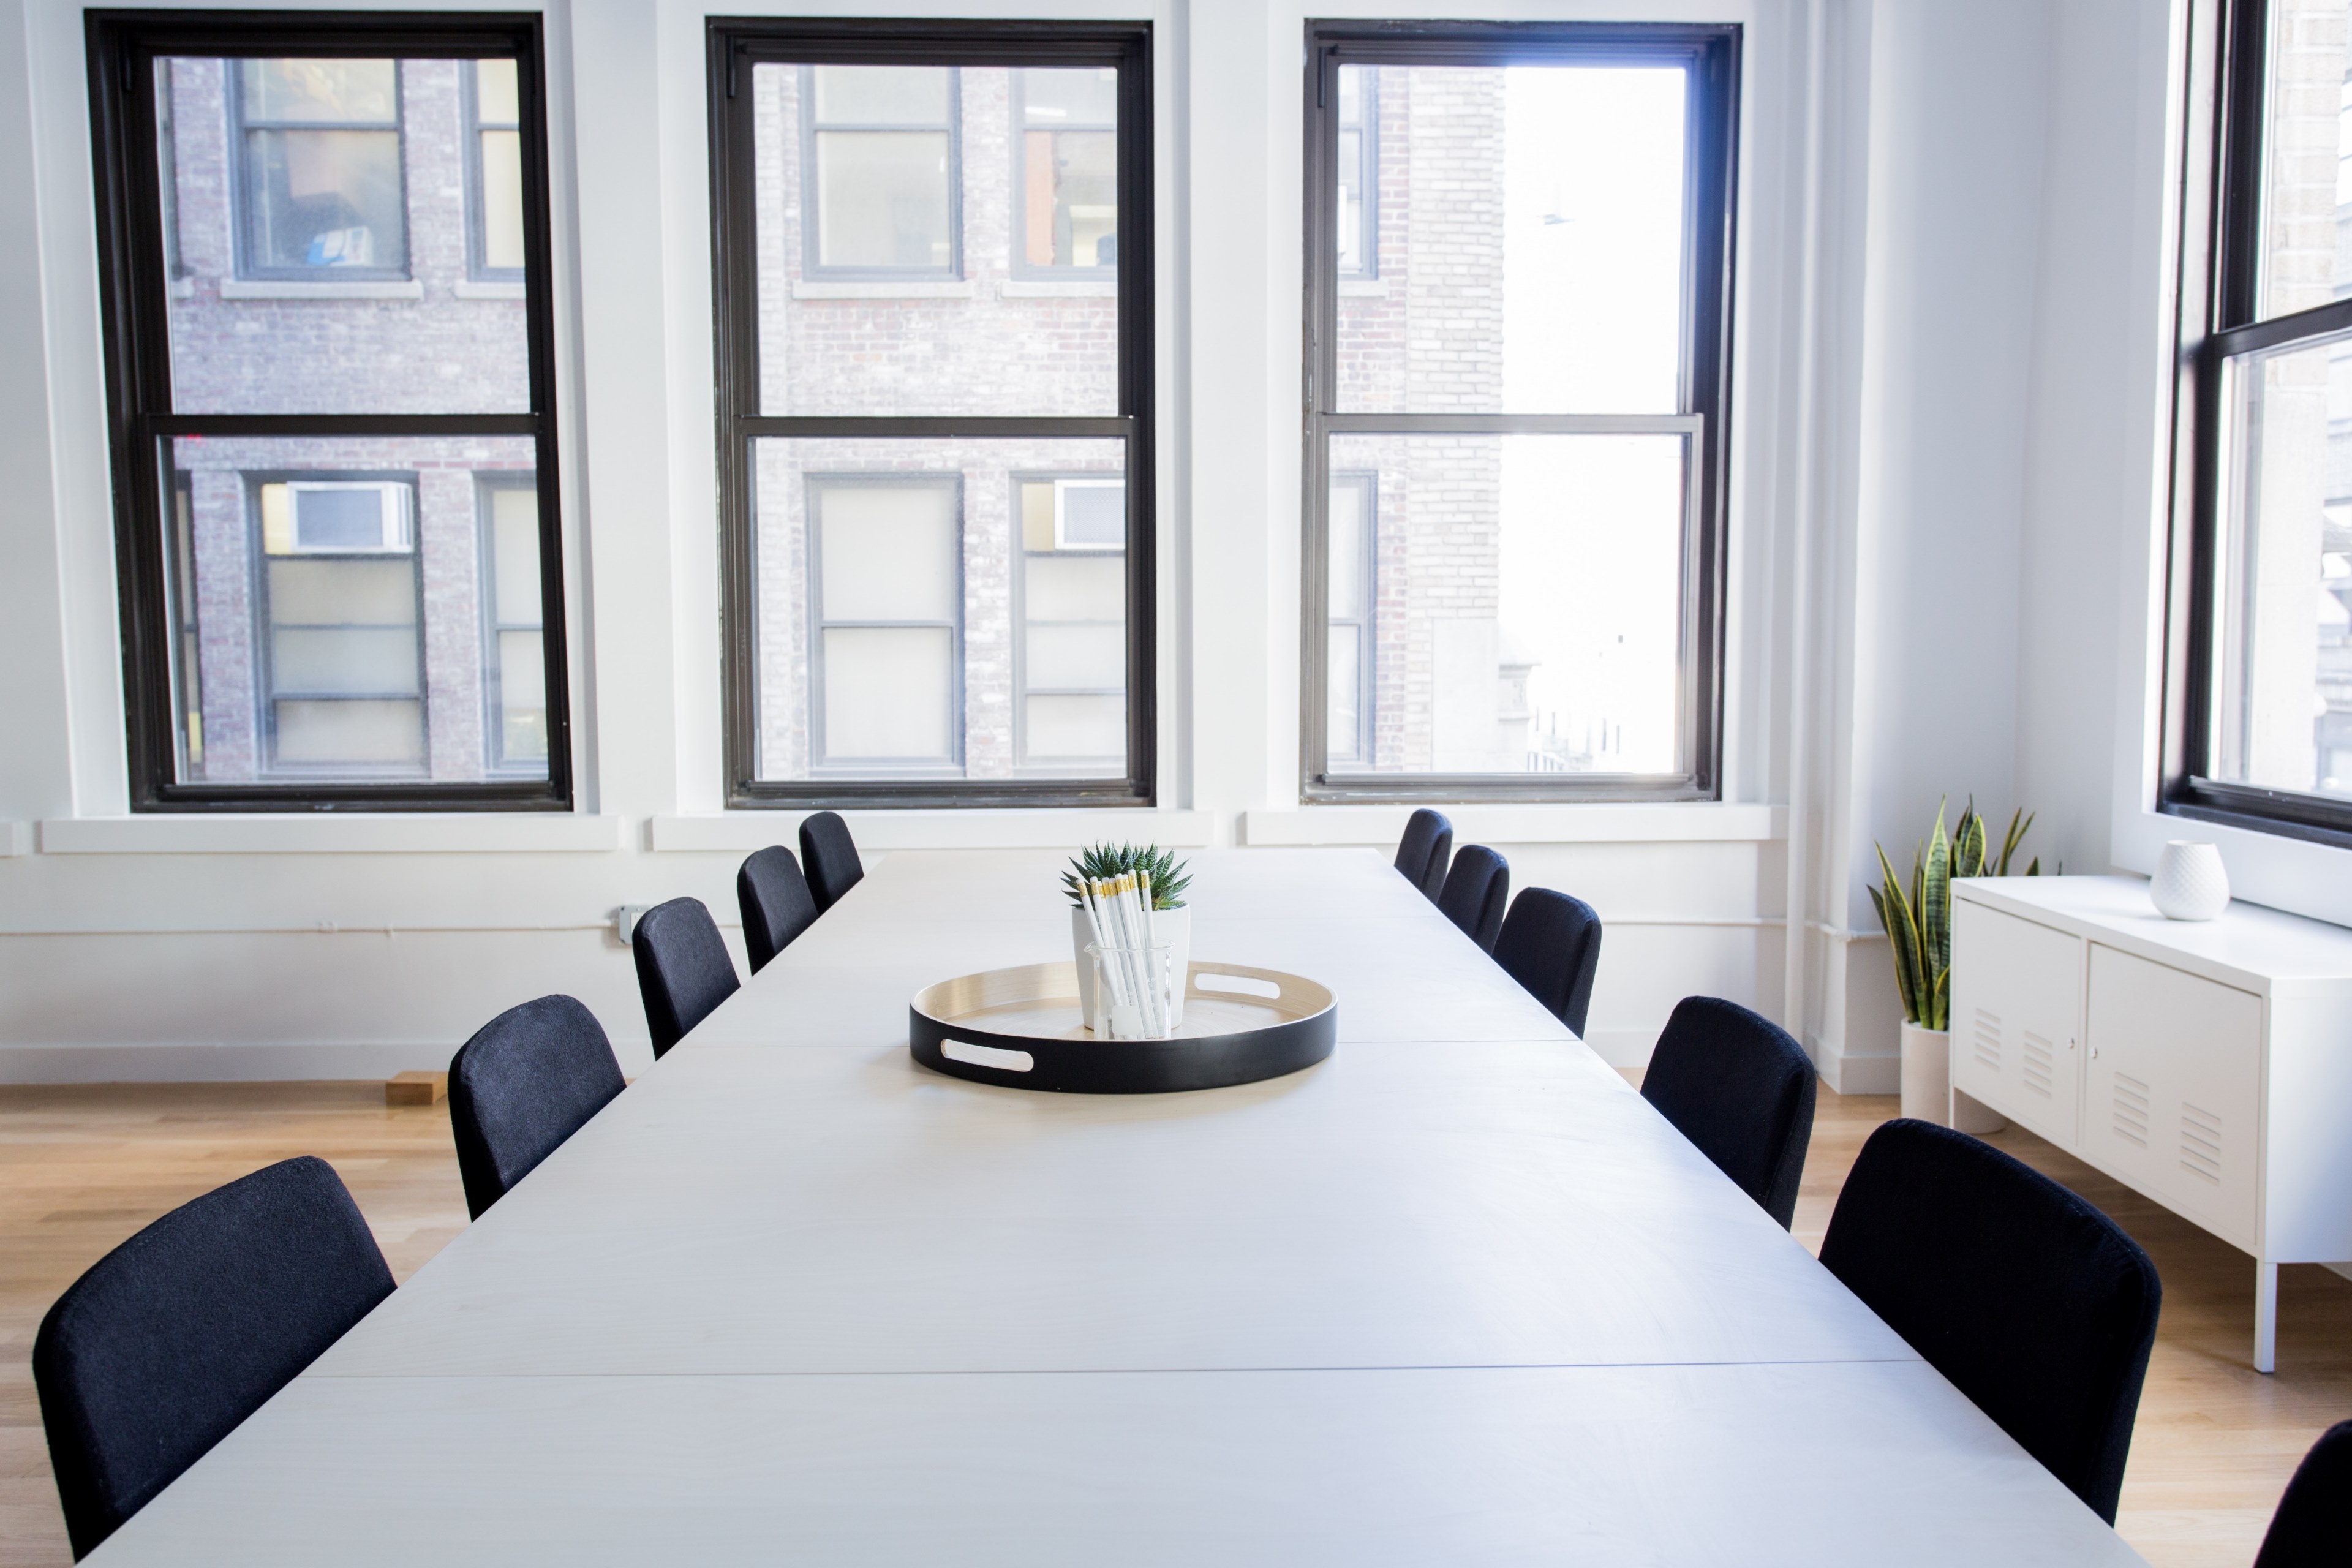 Meeting Room Photos Download The BEST Free Meeting Room Stock Photos  HD  Images